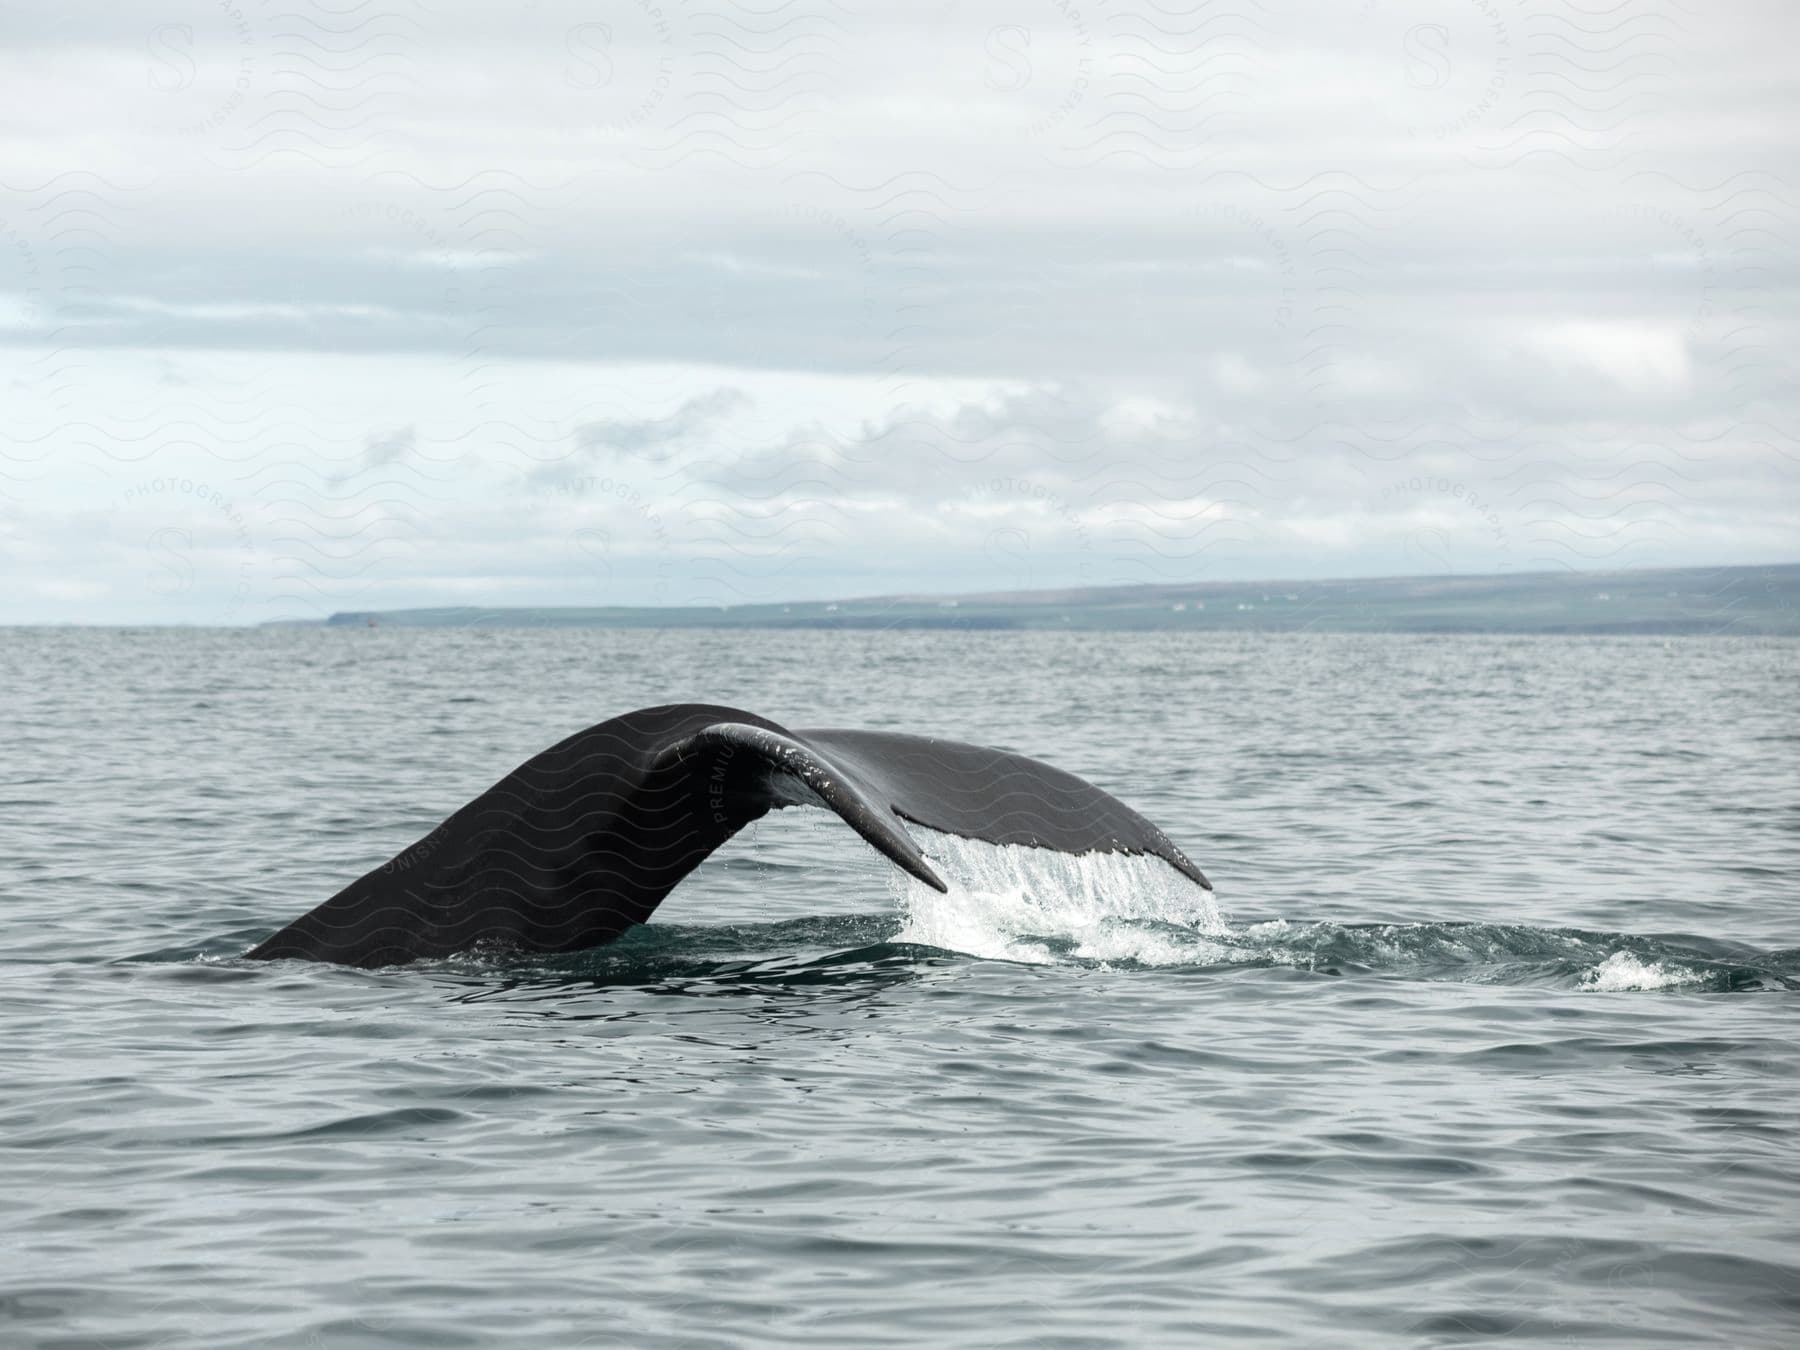 A whales tail peeks out of the ocean